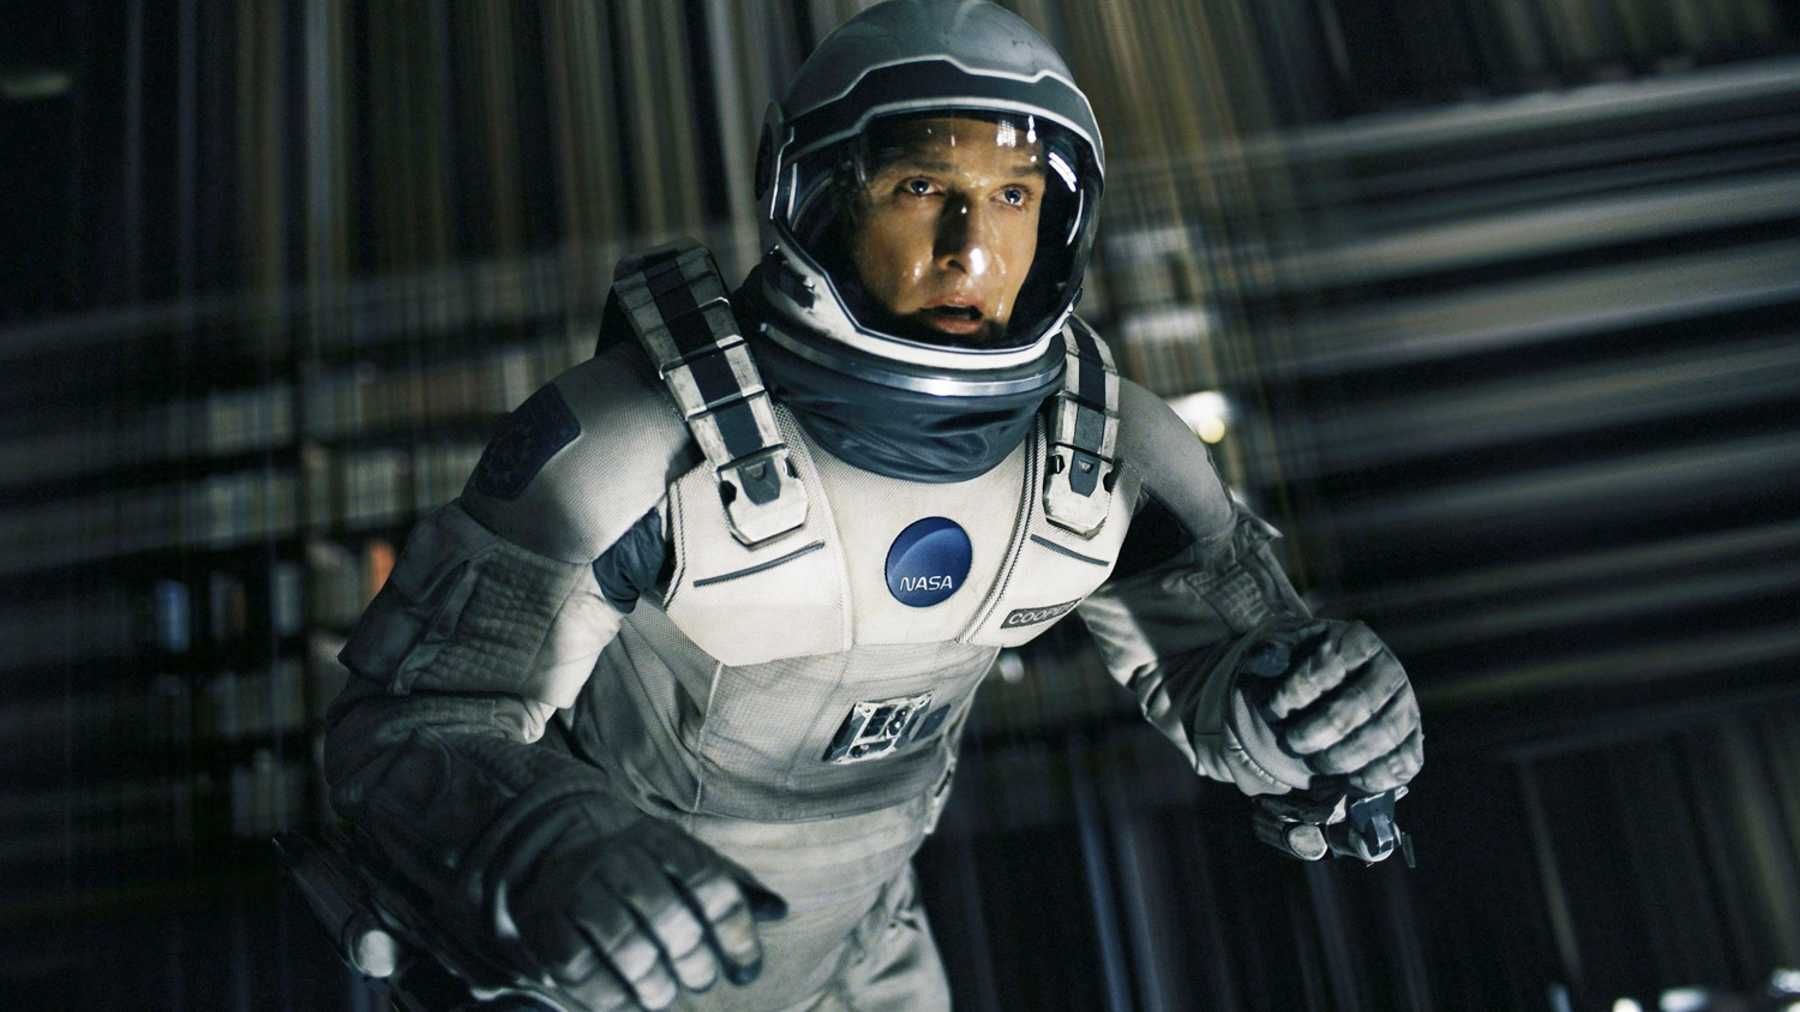 <p>When it hit theatres, Christopher Nolan’s <em>Interstellar</em> was an instant sensation—and it’s no wonder! Set in a chilling, soon-to-be-uninhabitable Earth, the story follows a team of NASA astronauts who embark on a secret mission to find a habitable planet—and along the way, begin to experience time differently. Lauded for its <a href="https://storymaps.arcgis.com/stories/b82e998fa2864a0e96638f248615de04">scientific accuracy</a> and groundbreaking visual effects, the film combines <a href="https://www.rogerebert.com/reviews/interstellar-2014">“high-tech glitz” and “old-movie feeling.”</a> Critics also praised the moving performances by Matthew McConaughey and Anne Hathaway.</p>